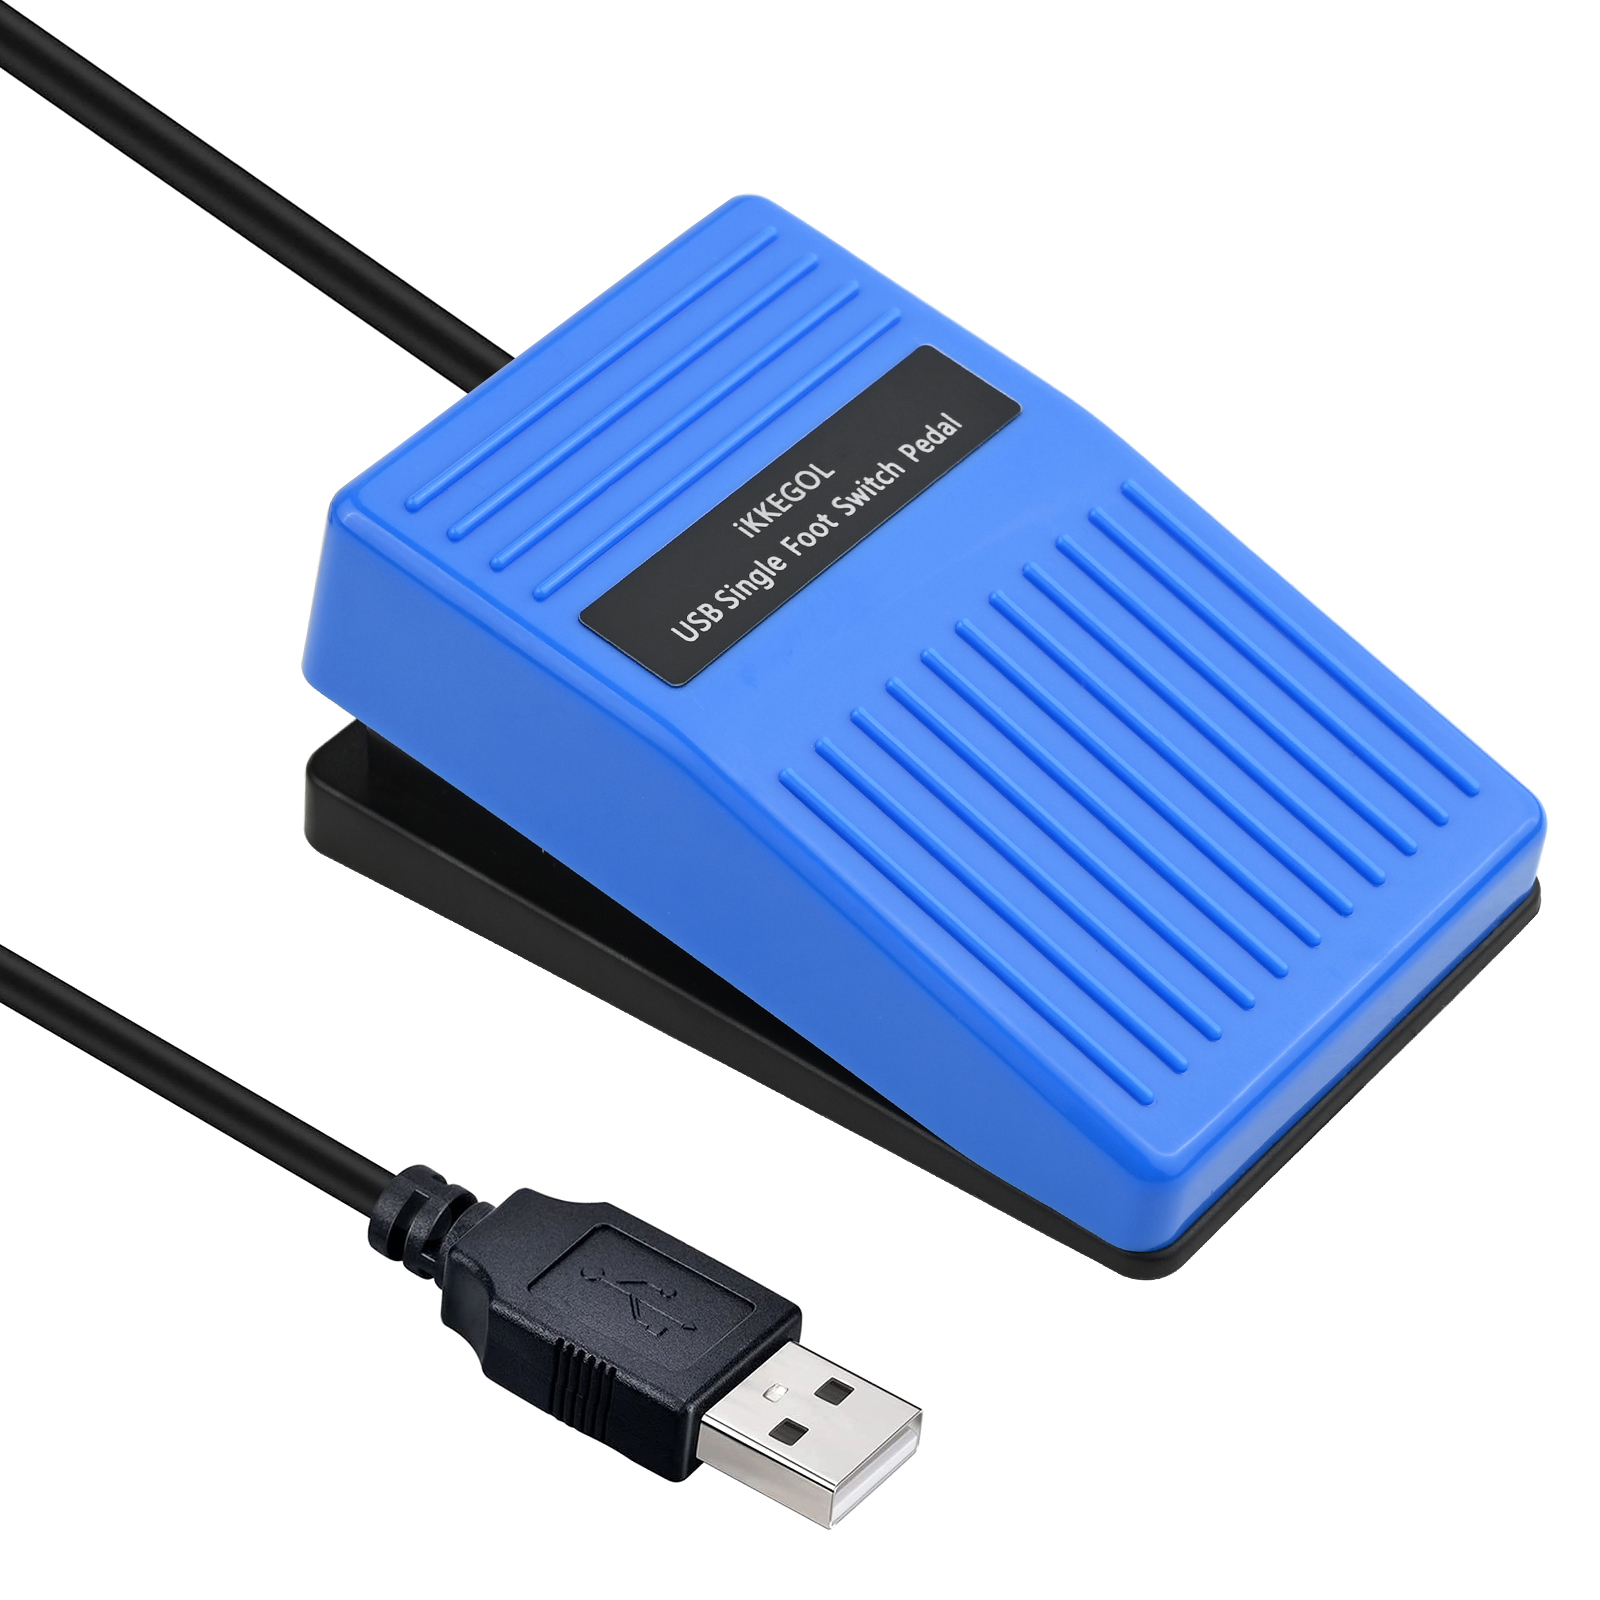 iKKEGOL USB Photoelectric Foot Control Action Switch Blue Pedal